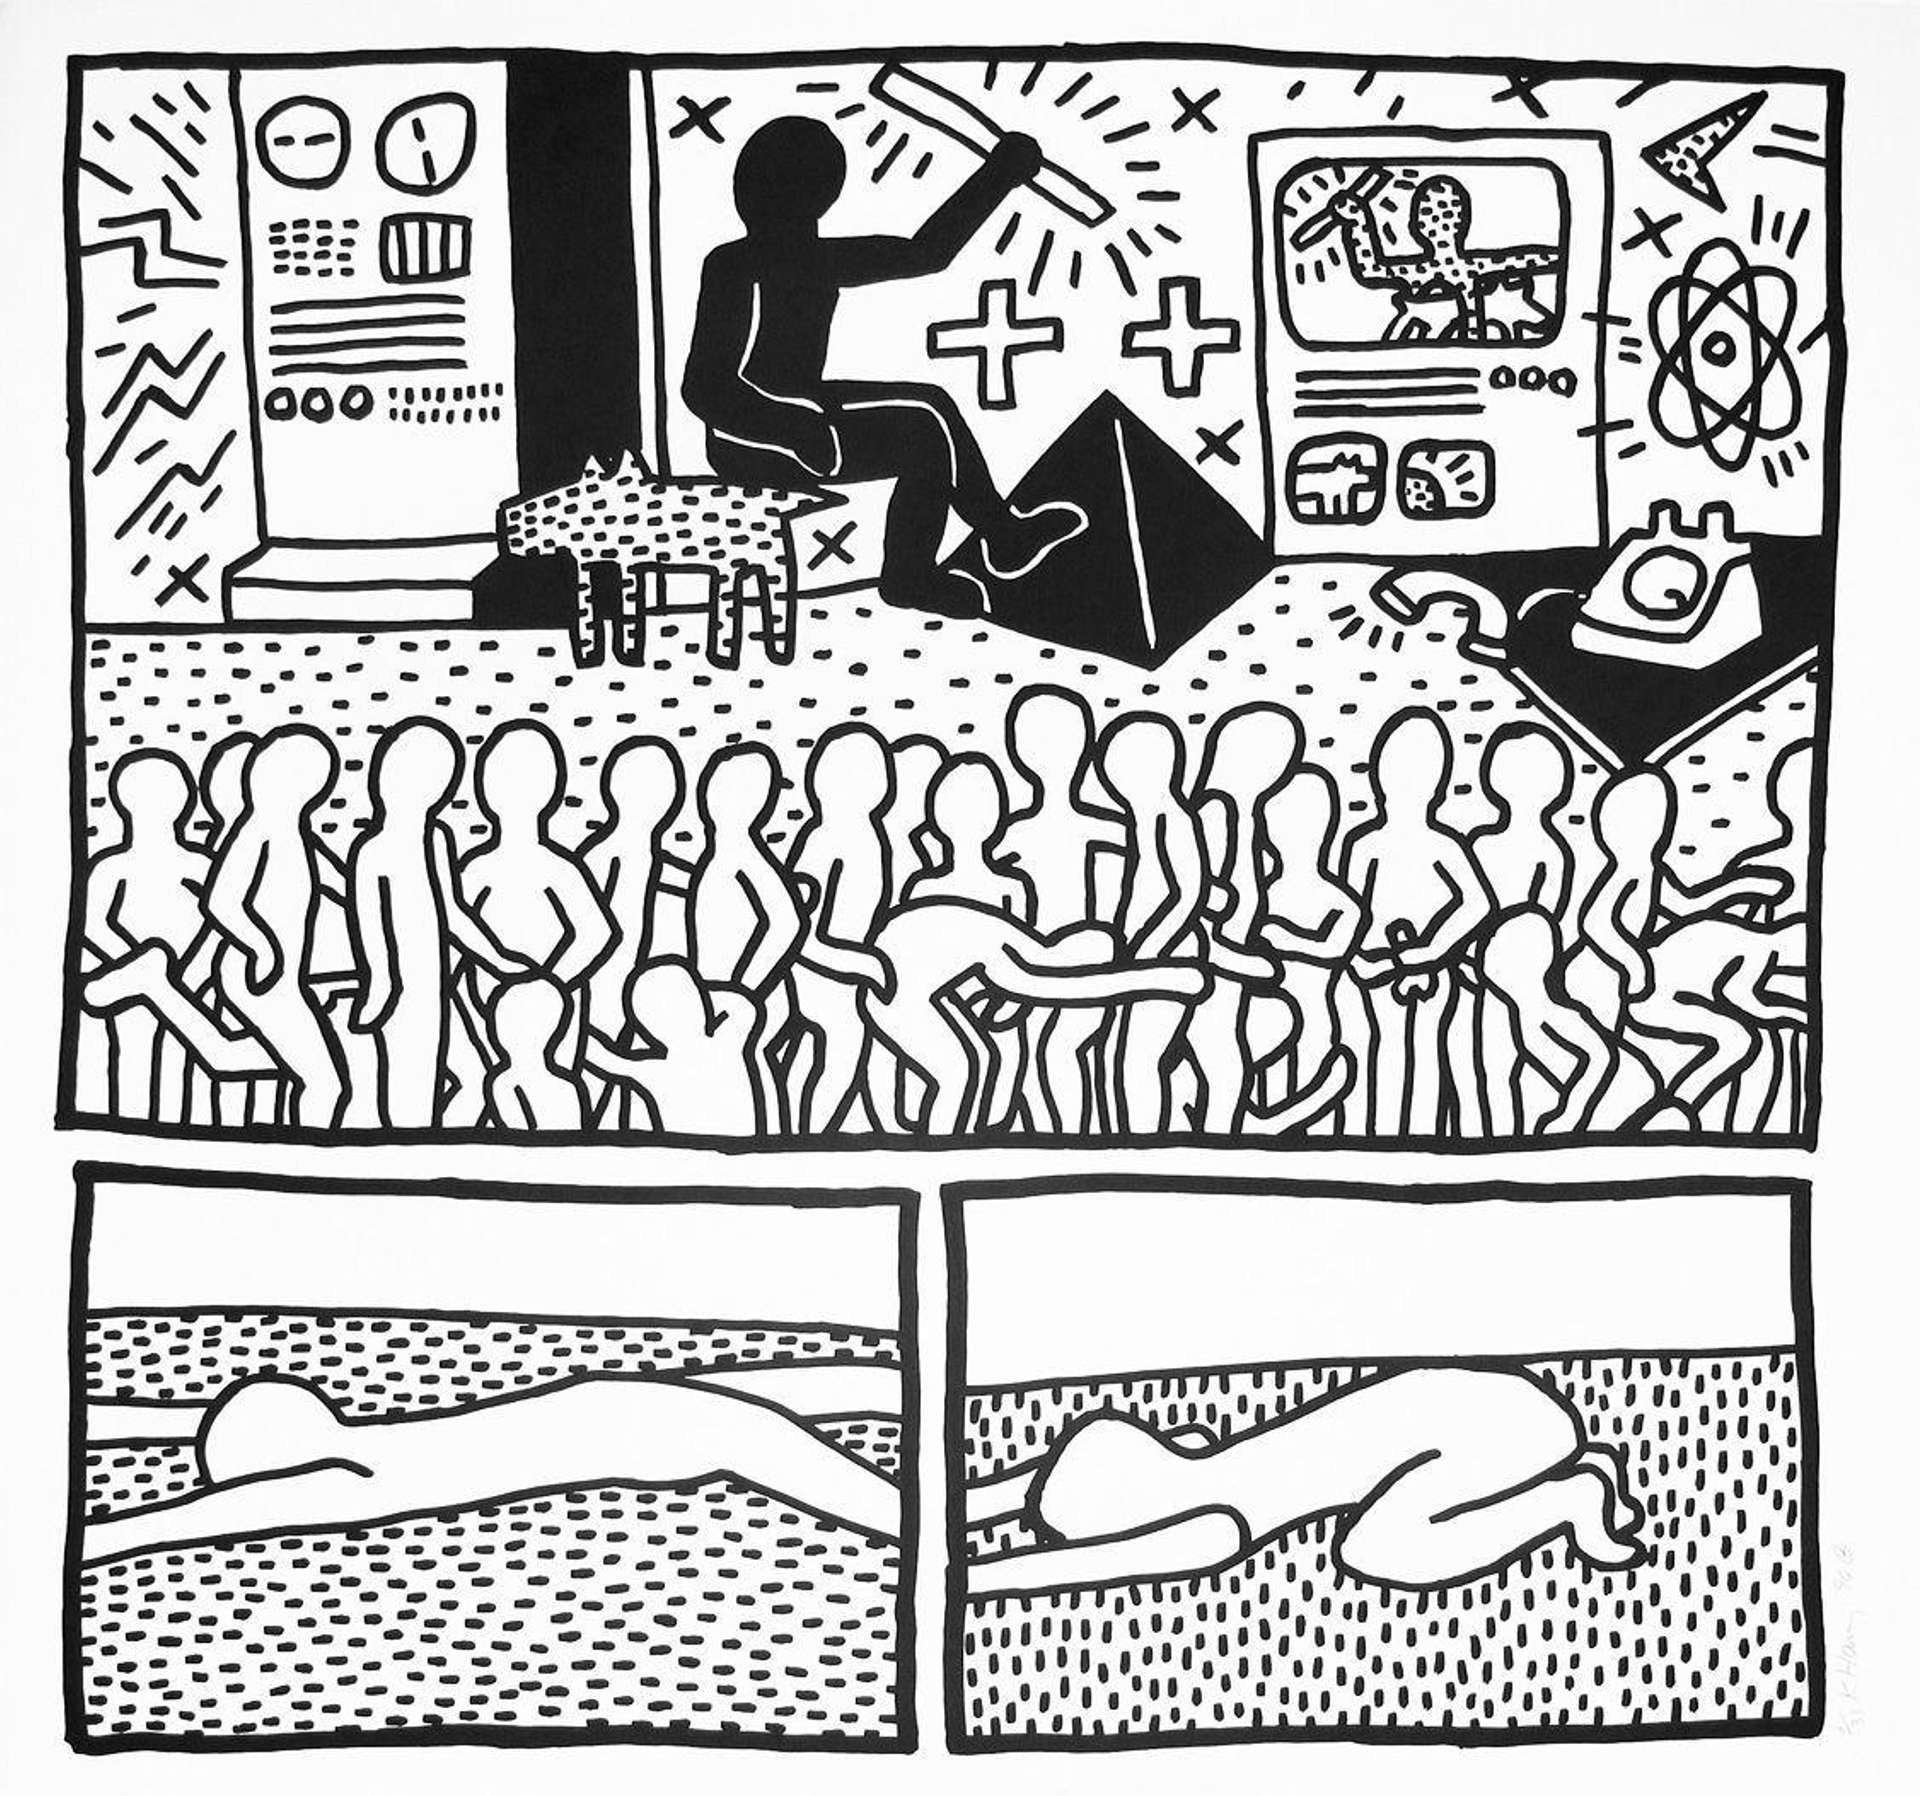 Keith Haring’s The Blueprint Drawings 15. A Pop Art screenprint of a black and white comic strip of various scenes including figures together watching television.